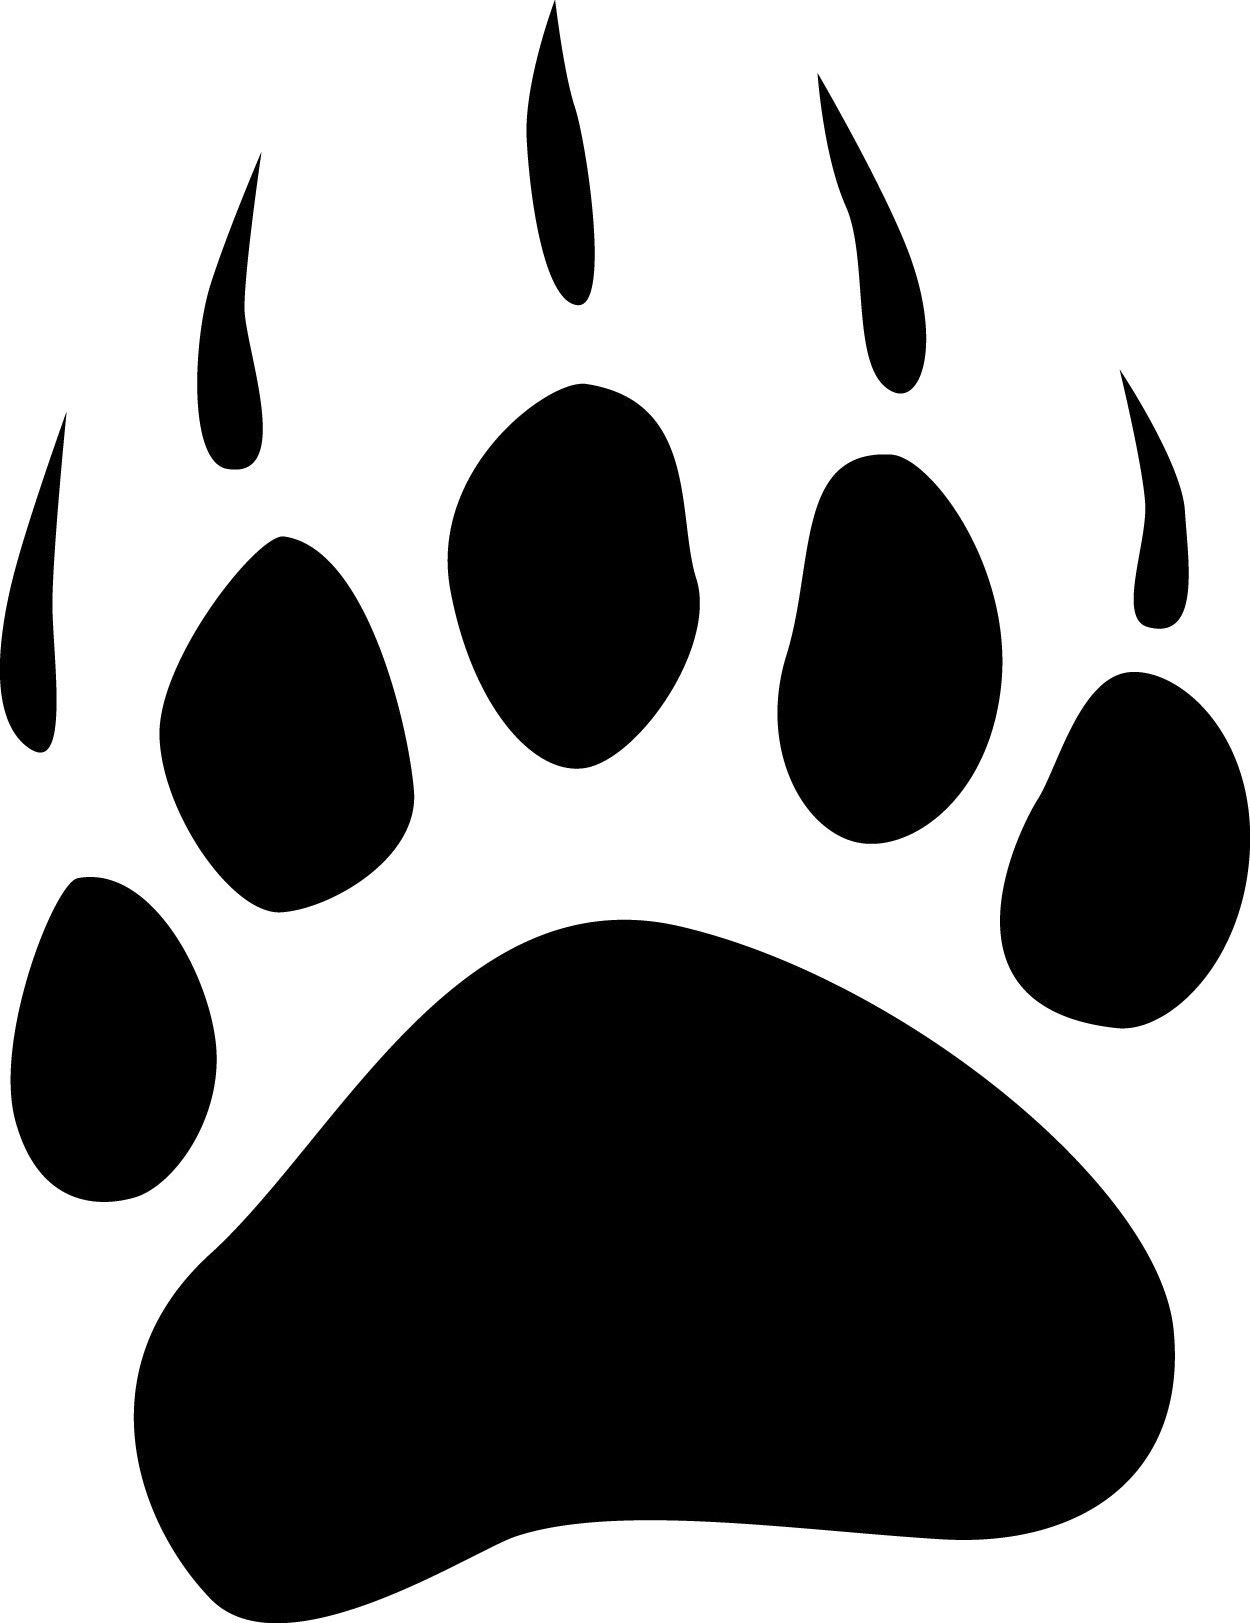 Panther Paw Tracks - ClipArt Best